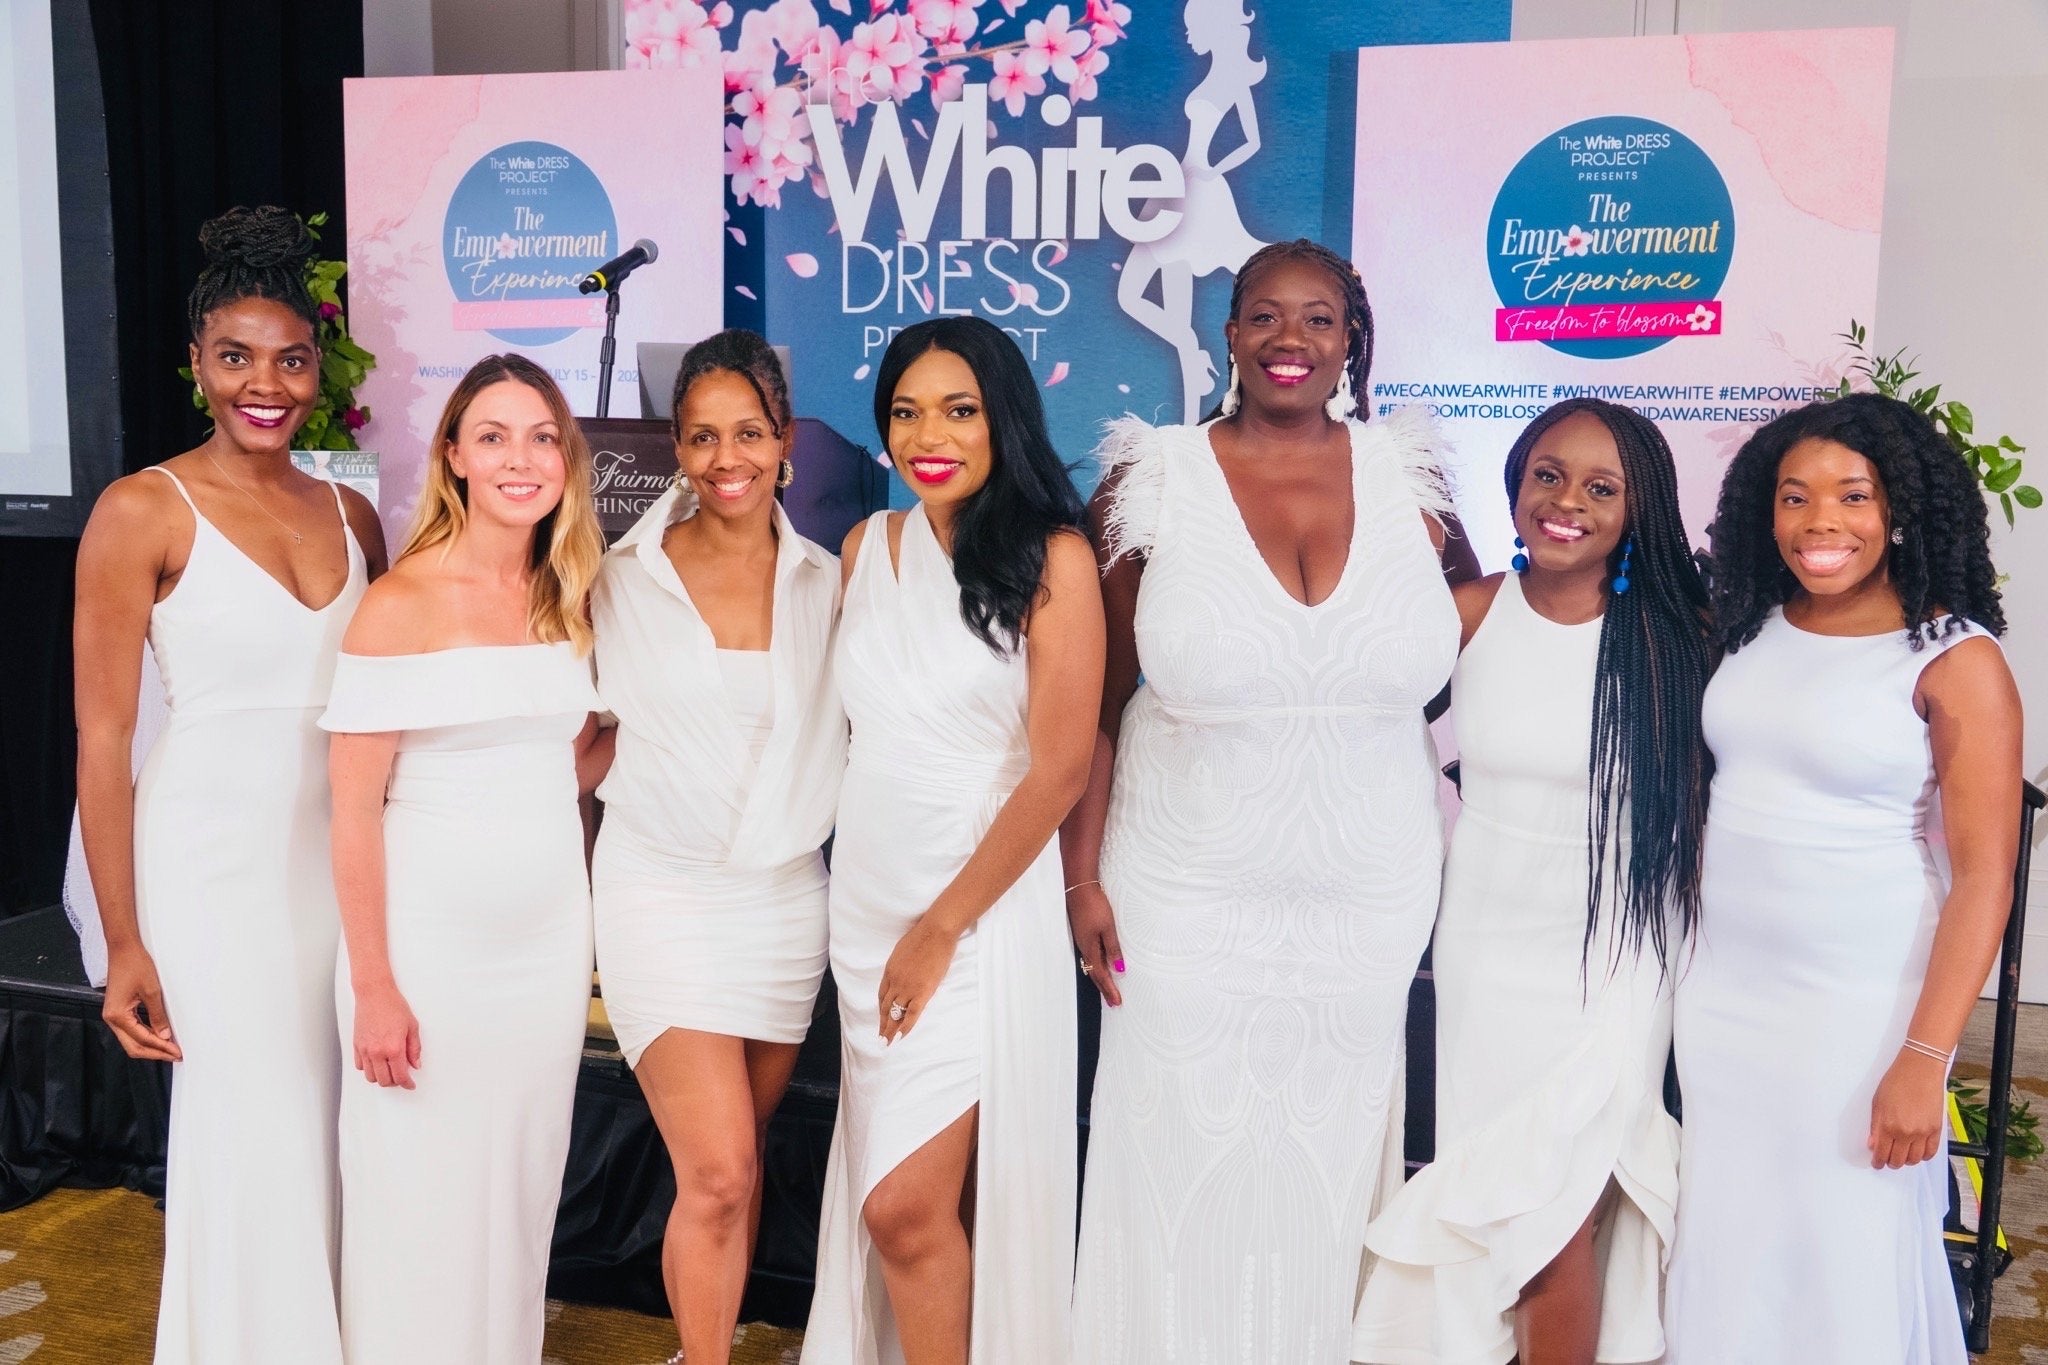 With 80 Percent Of Black Women Developing Fibroids In Their Lifetime, This Organization Proudly Wears White To Raise Awareness